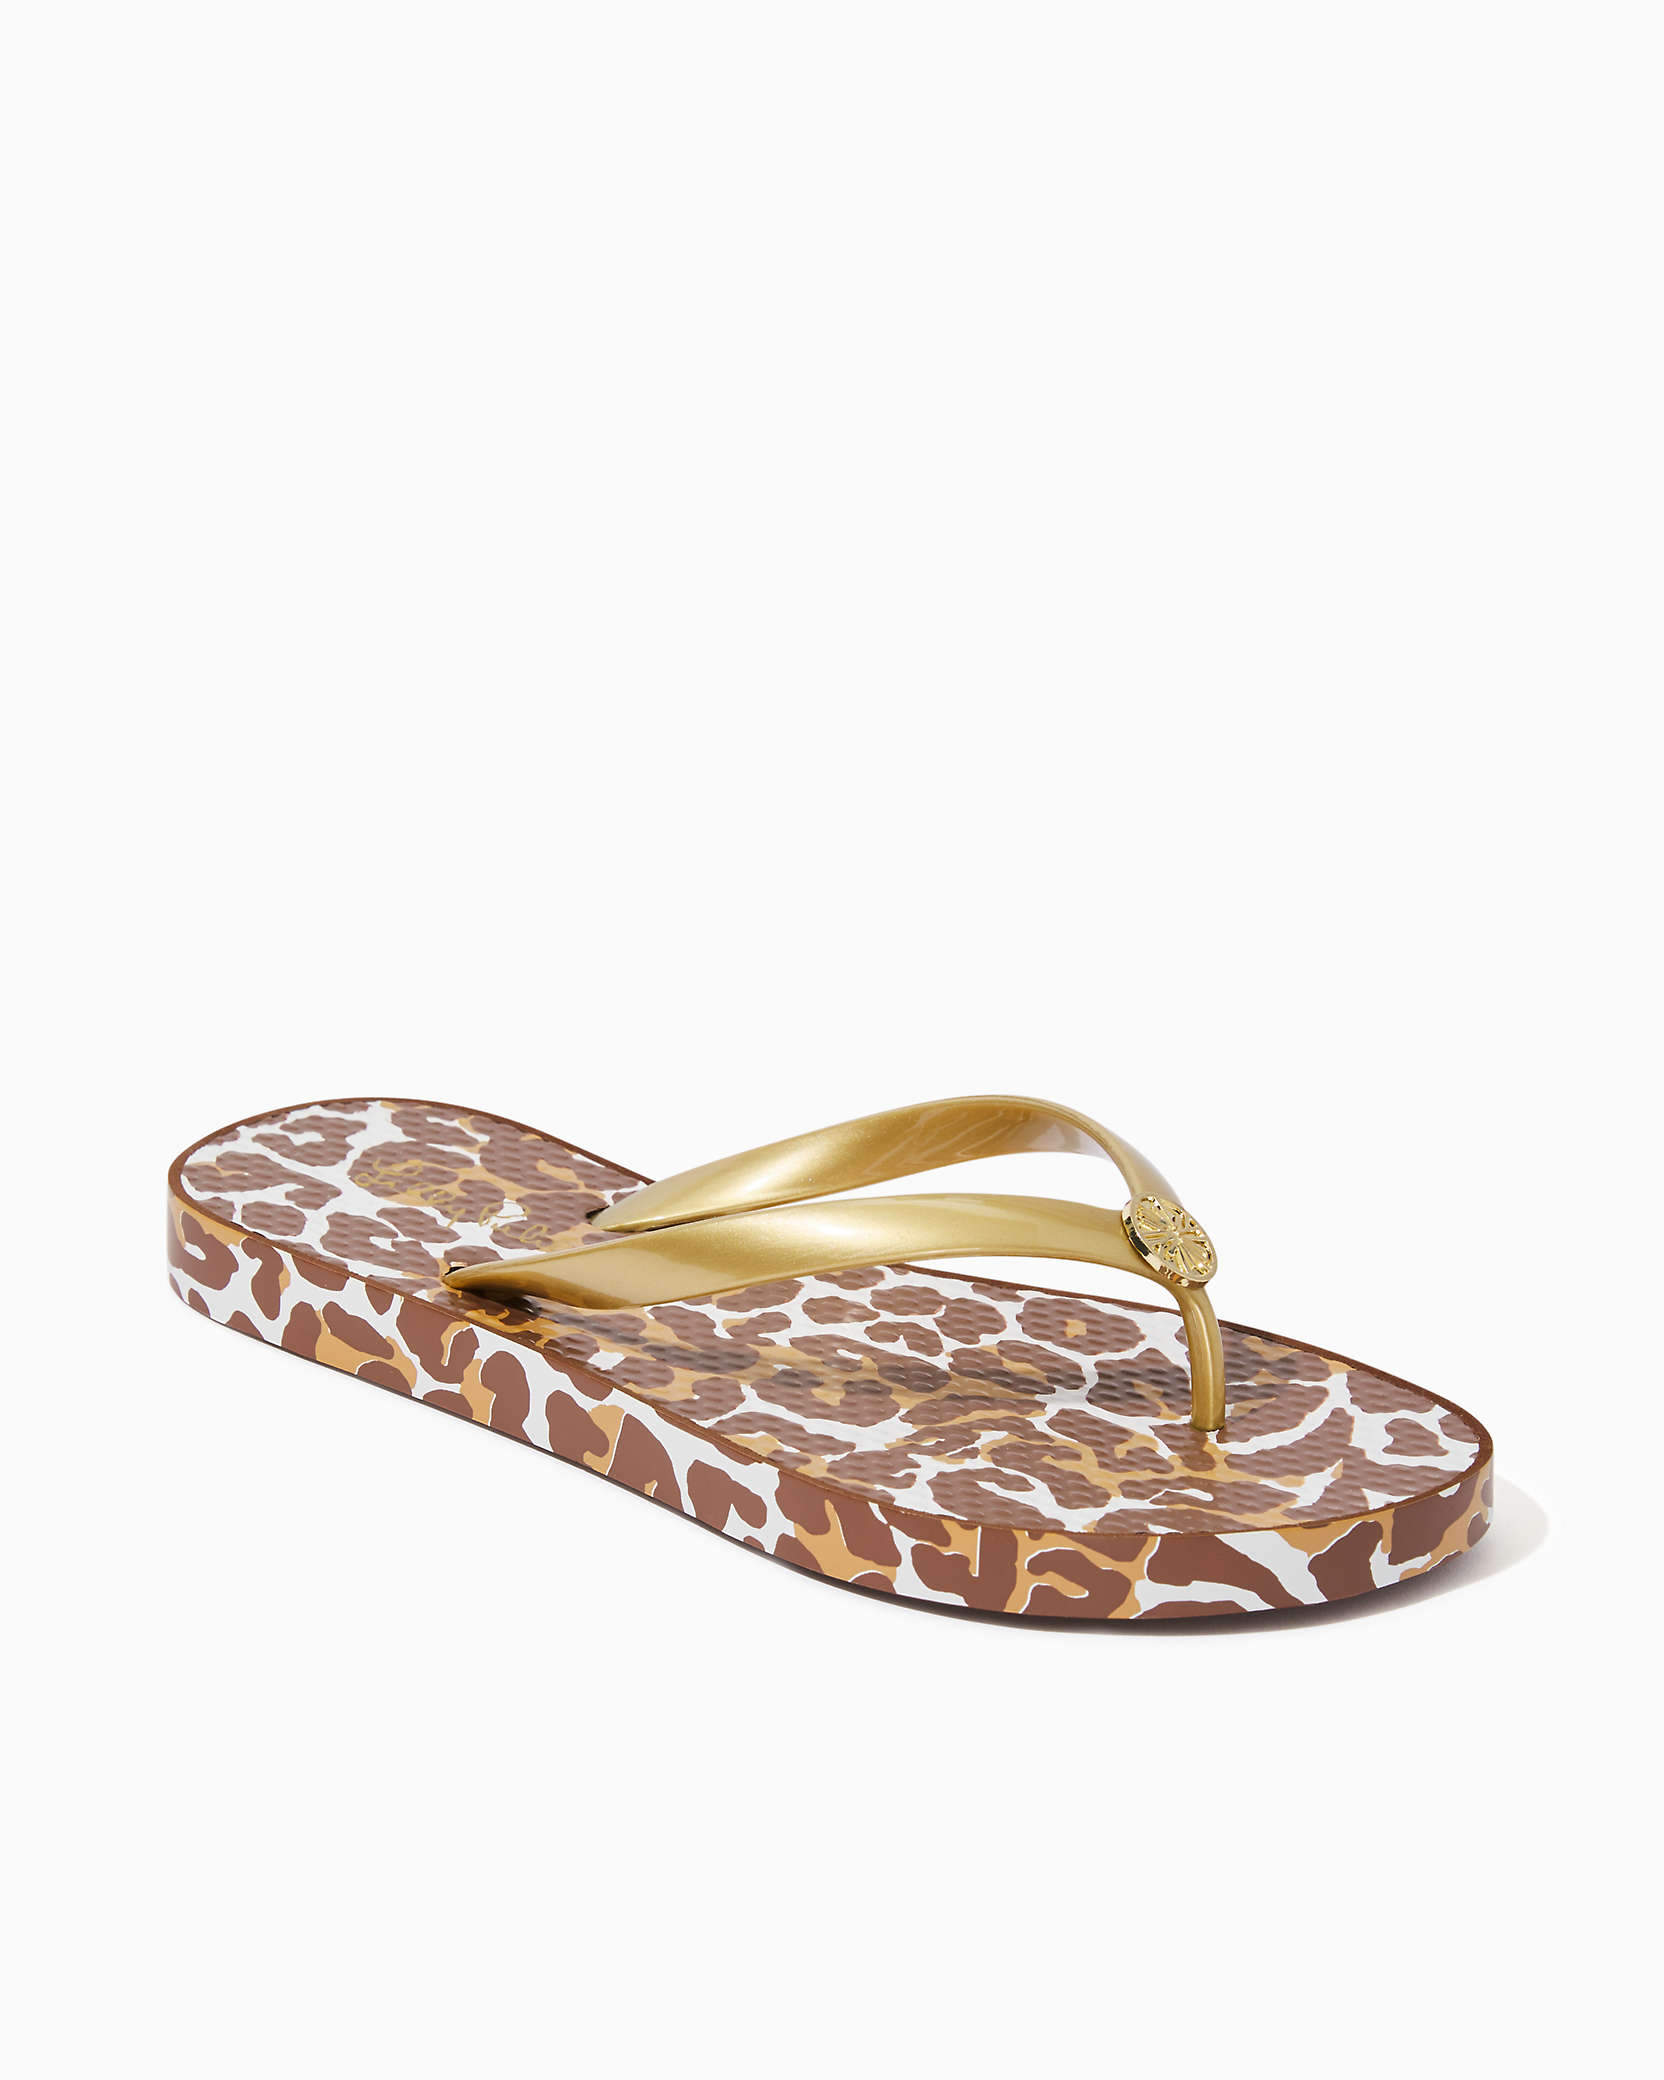 Lilly Pulitzer Pool Flip Flop In Chocolate My Favorite Spot Shoe